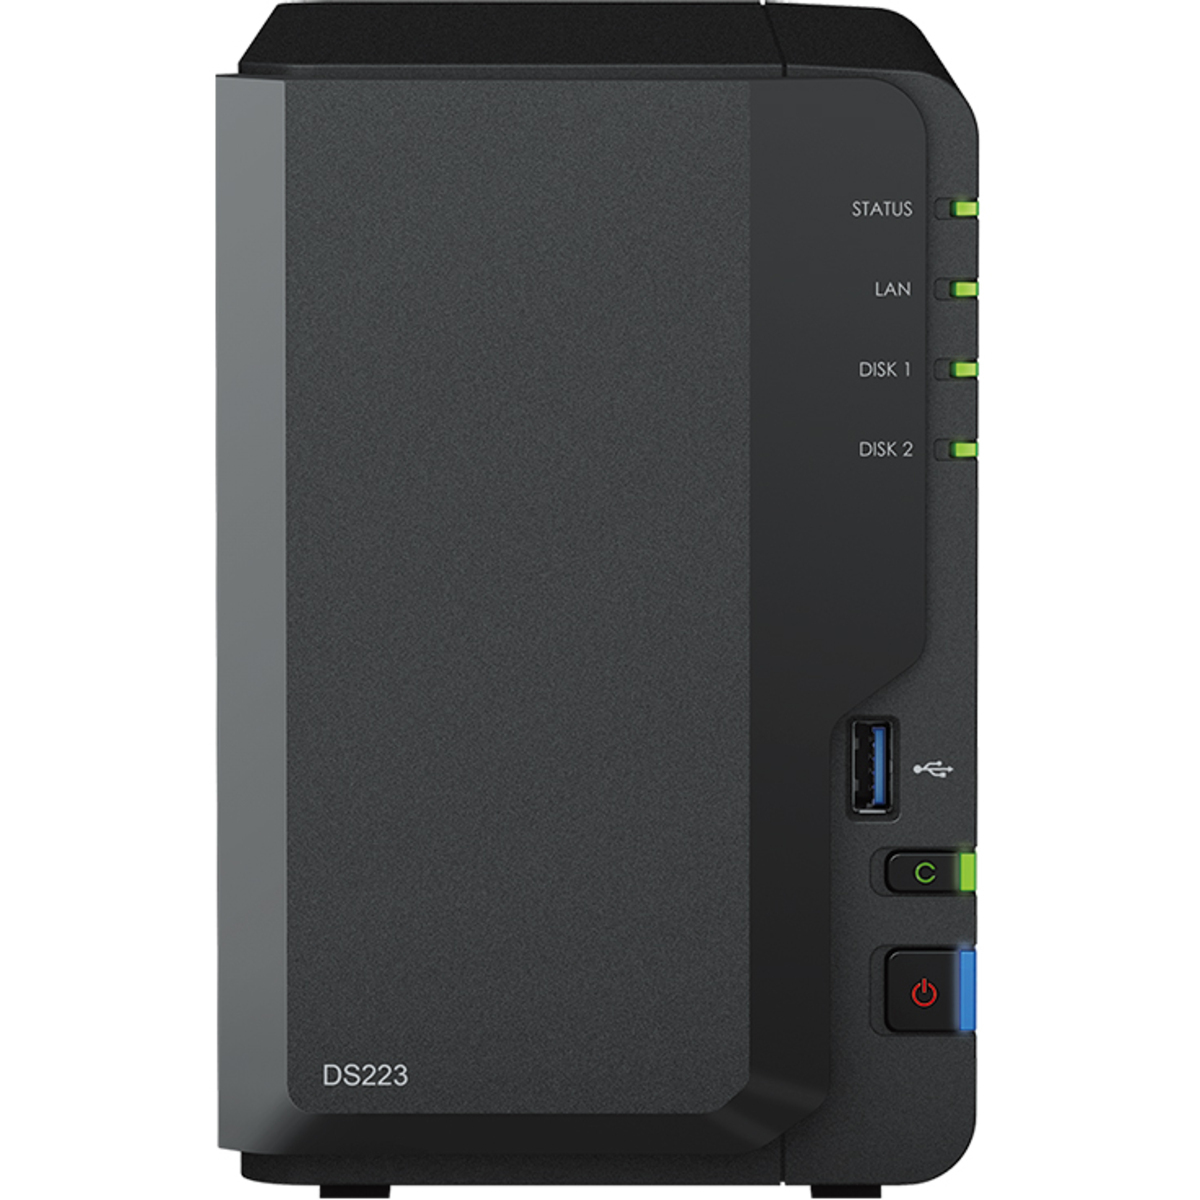 Synology DiskStation DS223 8tb 2-Bay Desktop Personal / Basic Home / Small Office NAS - Network Attached Storage Device 1x8tb Seagate BarraCuda ST8000DM004 3.5 5400rpm SATA 6Gb/s HDD CONSUMER Class Drives Installed - Burn-In Tested DiskStation DS223